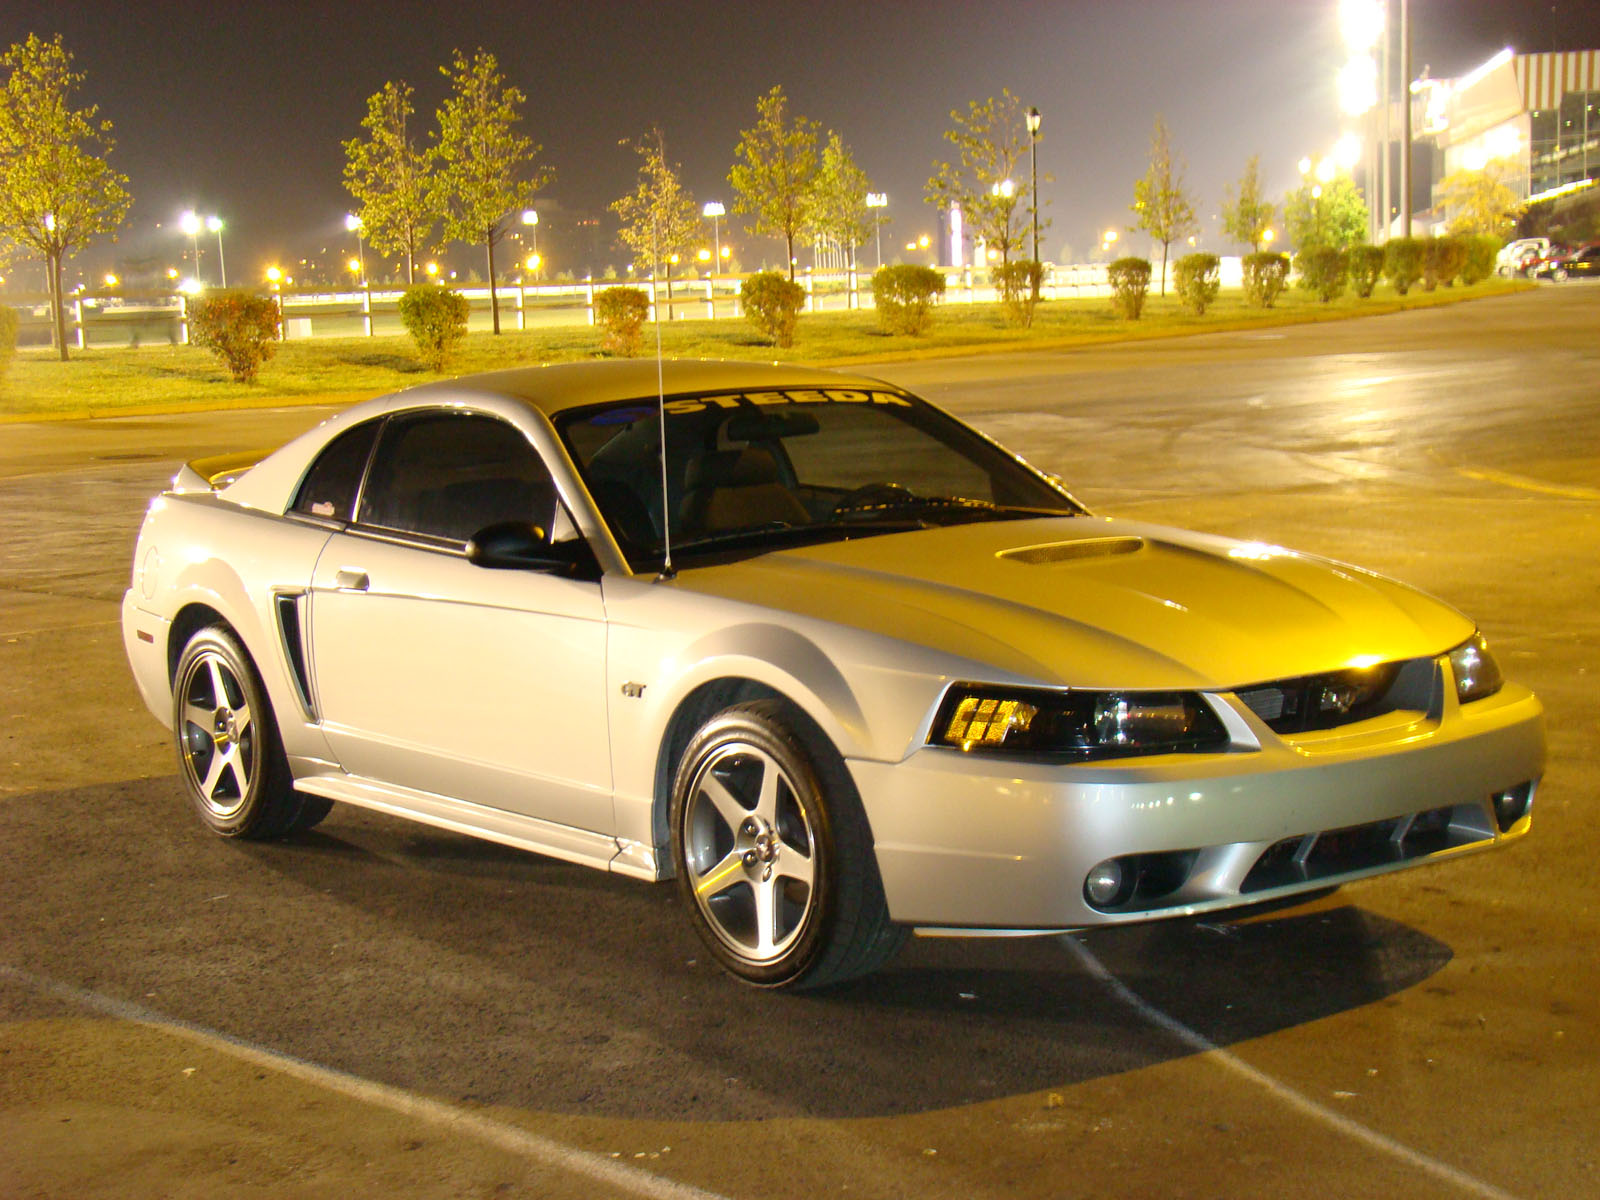 2000 Ford mustang gt quarter mile #4